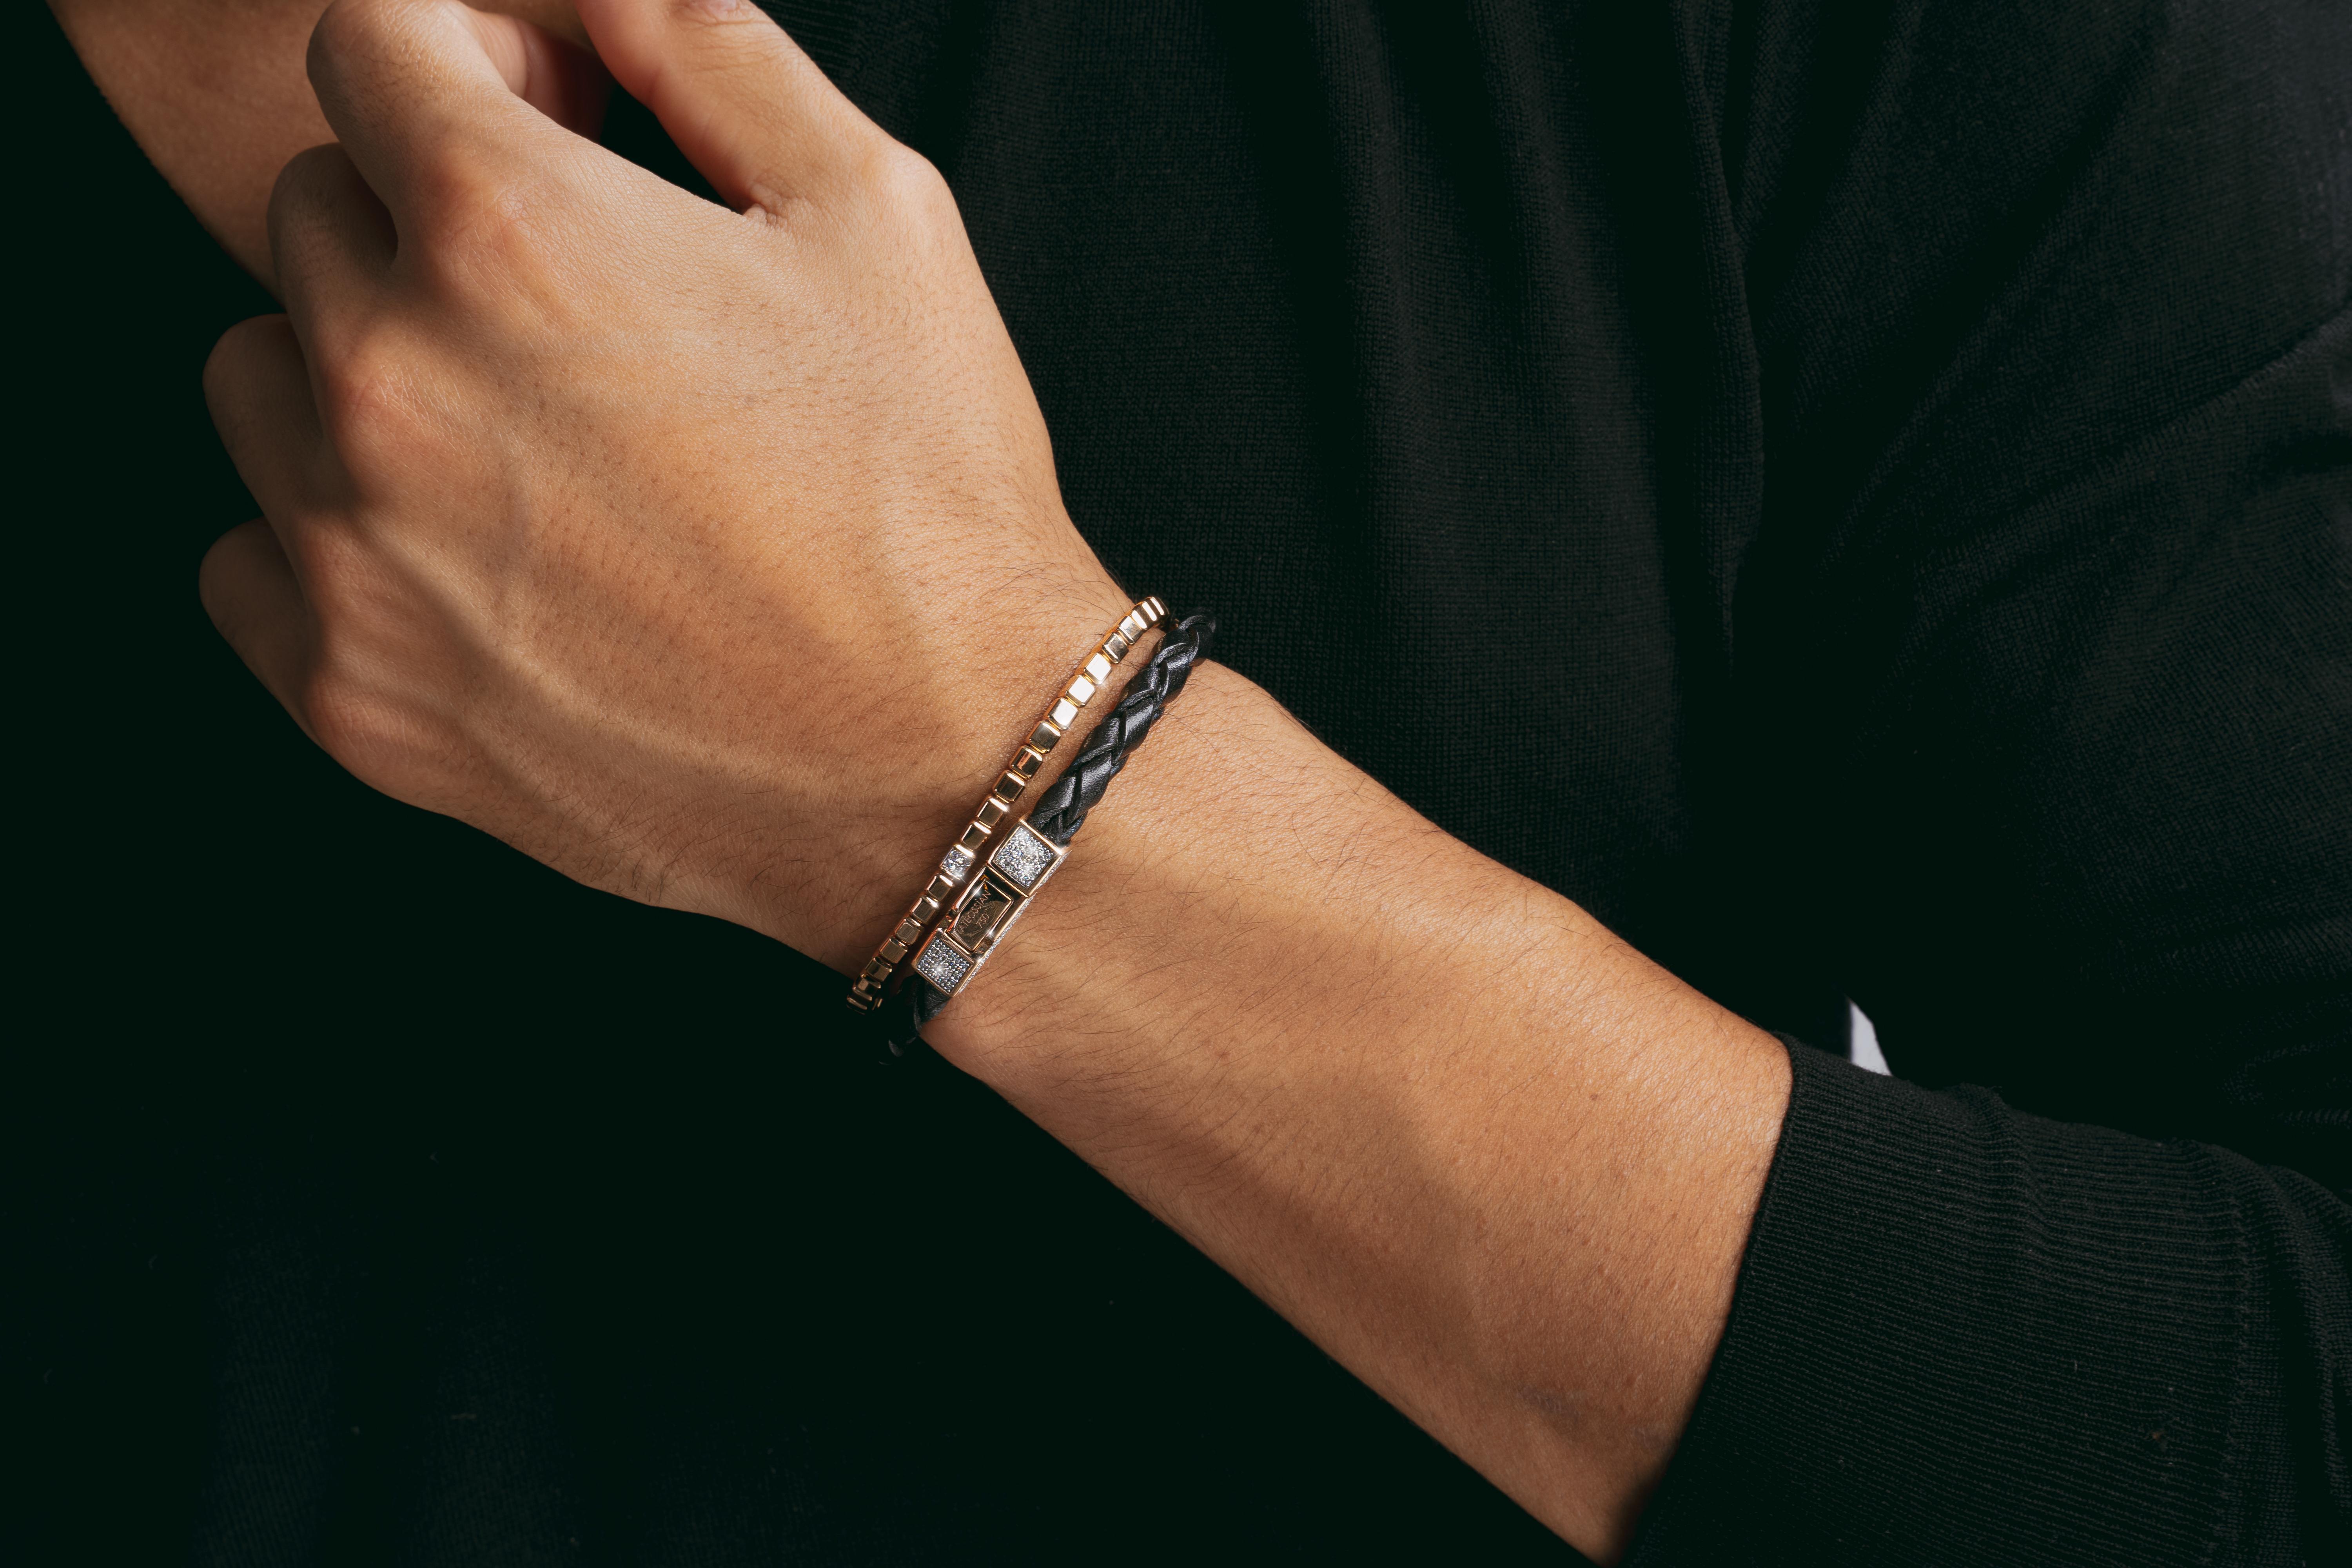 Delicate yet distinctive, this 18K rose gold bracelet features an inner elastic concealed with small cubes of 18carat gold. A single, central cube adds sparkle, studded with pave black diamonds on all four sides for a stylish look. Available in